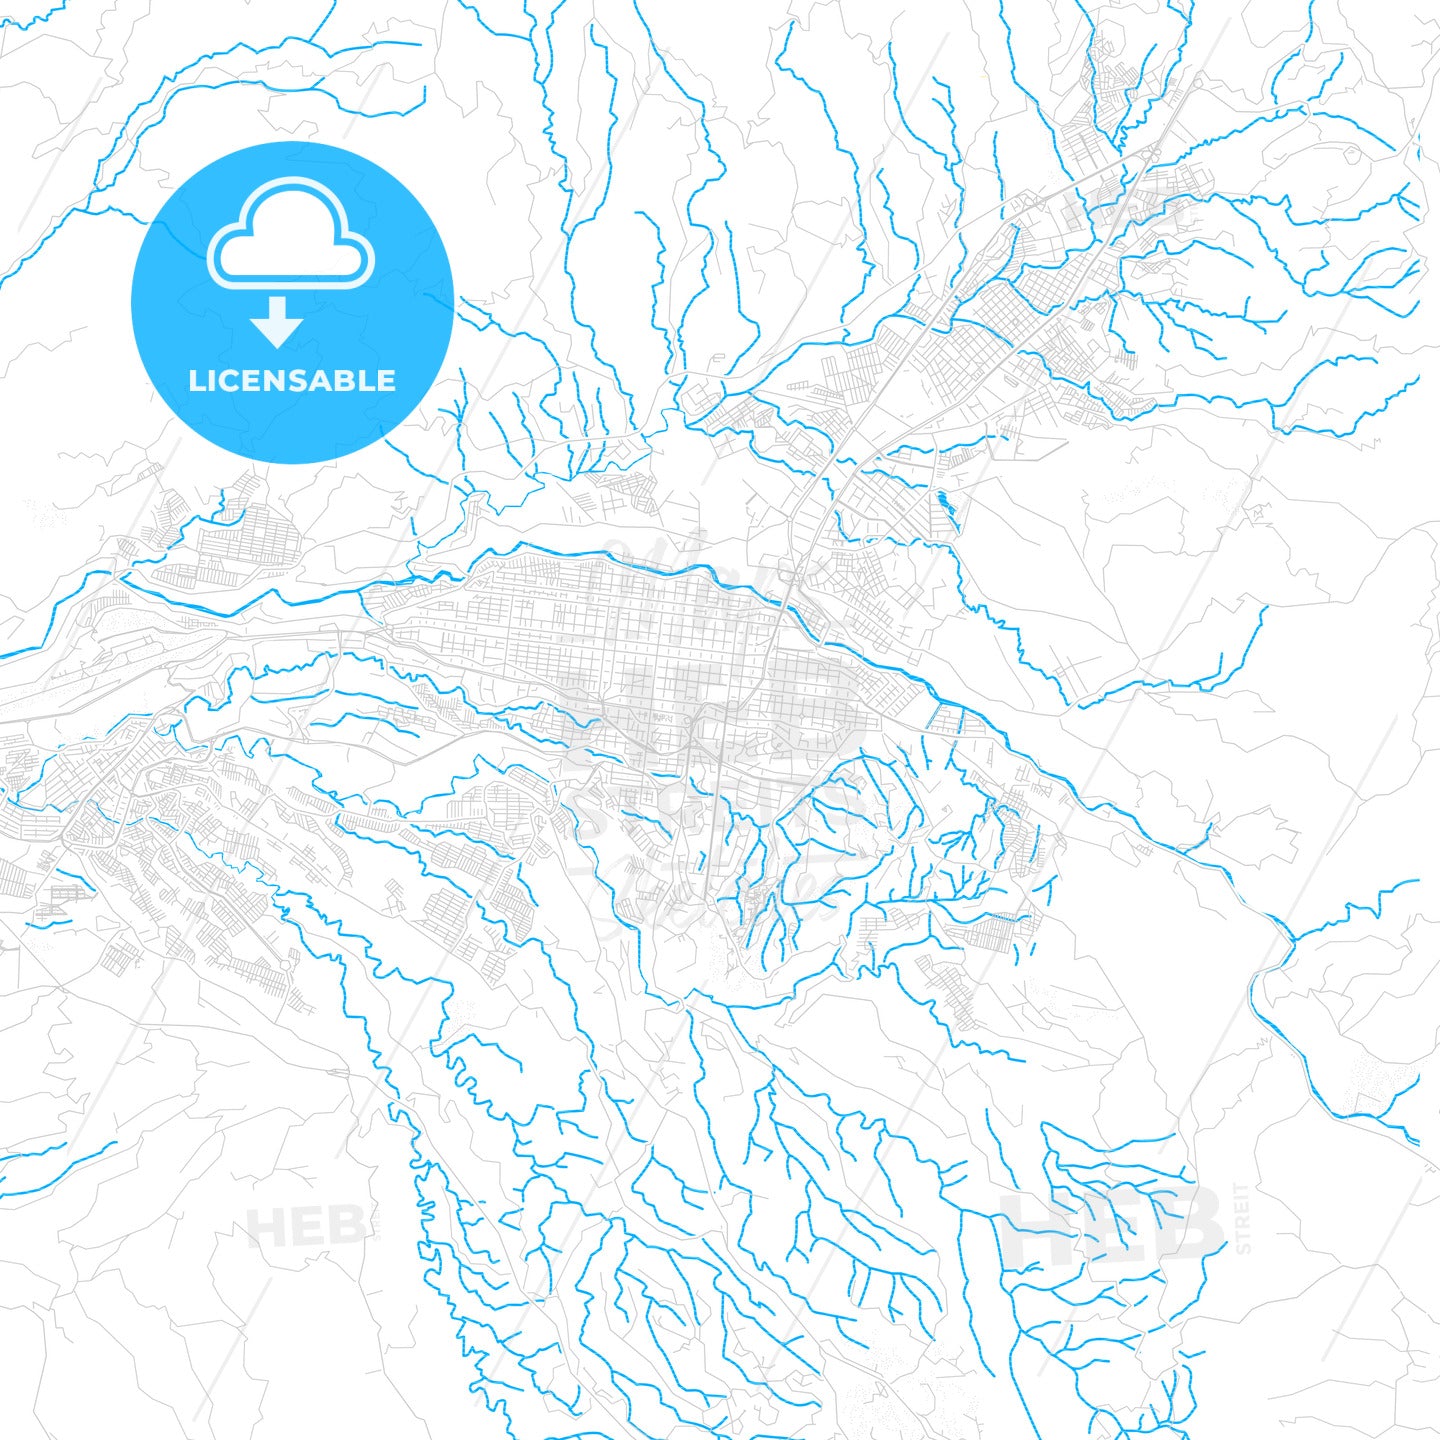 Pereira, Colombia PDF vector map with water in focus